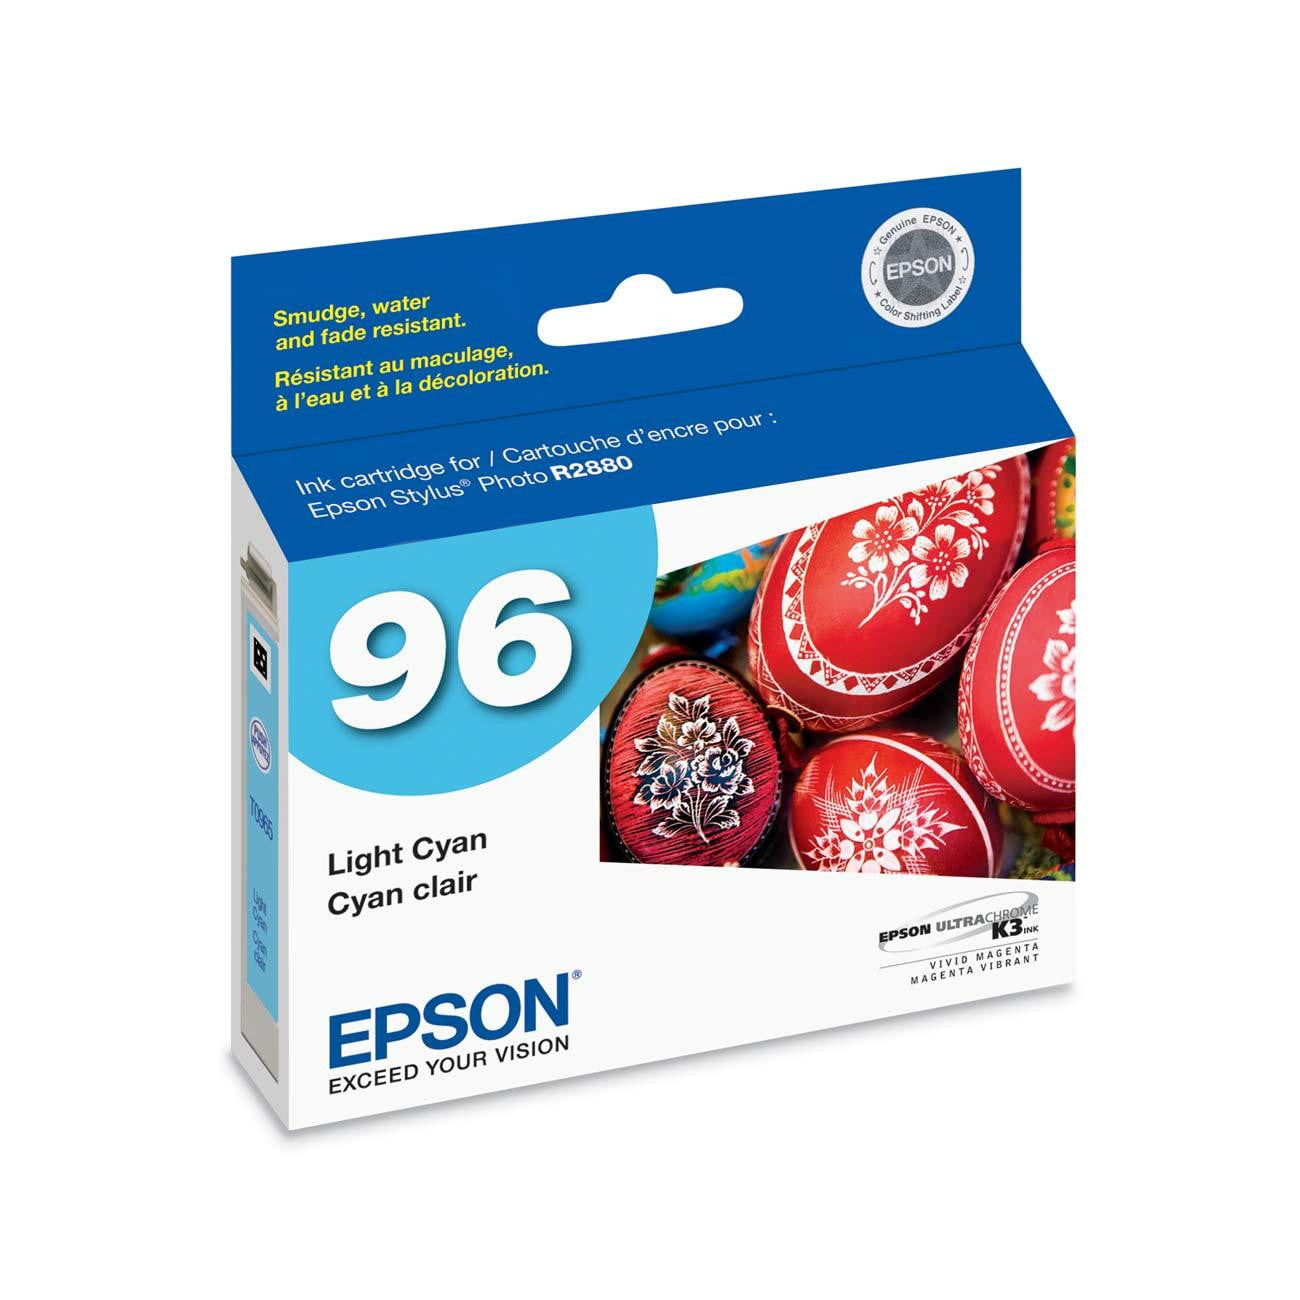 Epson T096520 R2880 Light Cyan Ink Cartridge (96), printers ink small format, Epson - Pictureline 